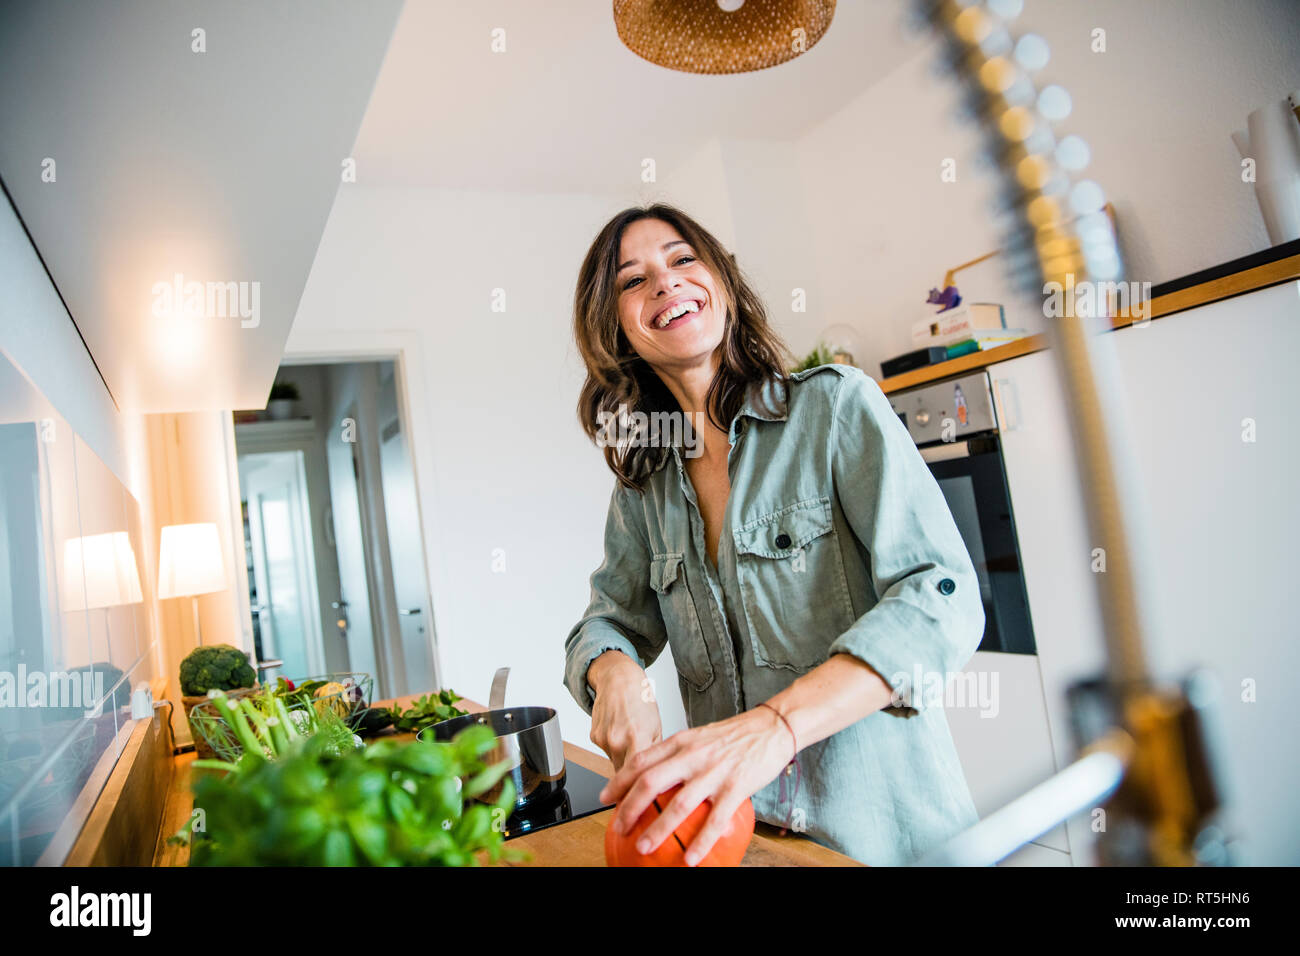 Laughing woman slicing pumpkin in her kitchen Stock Photo